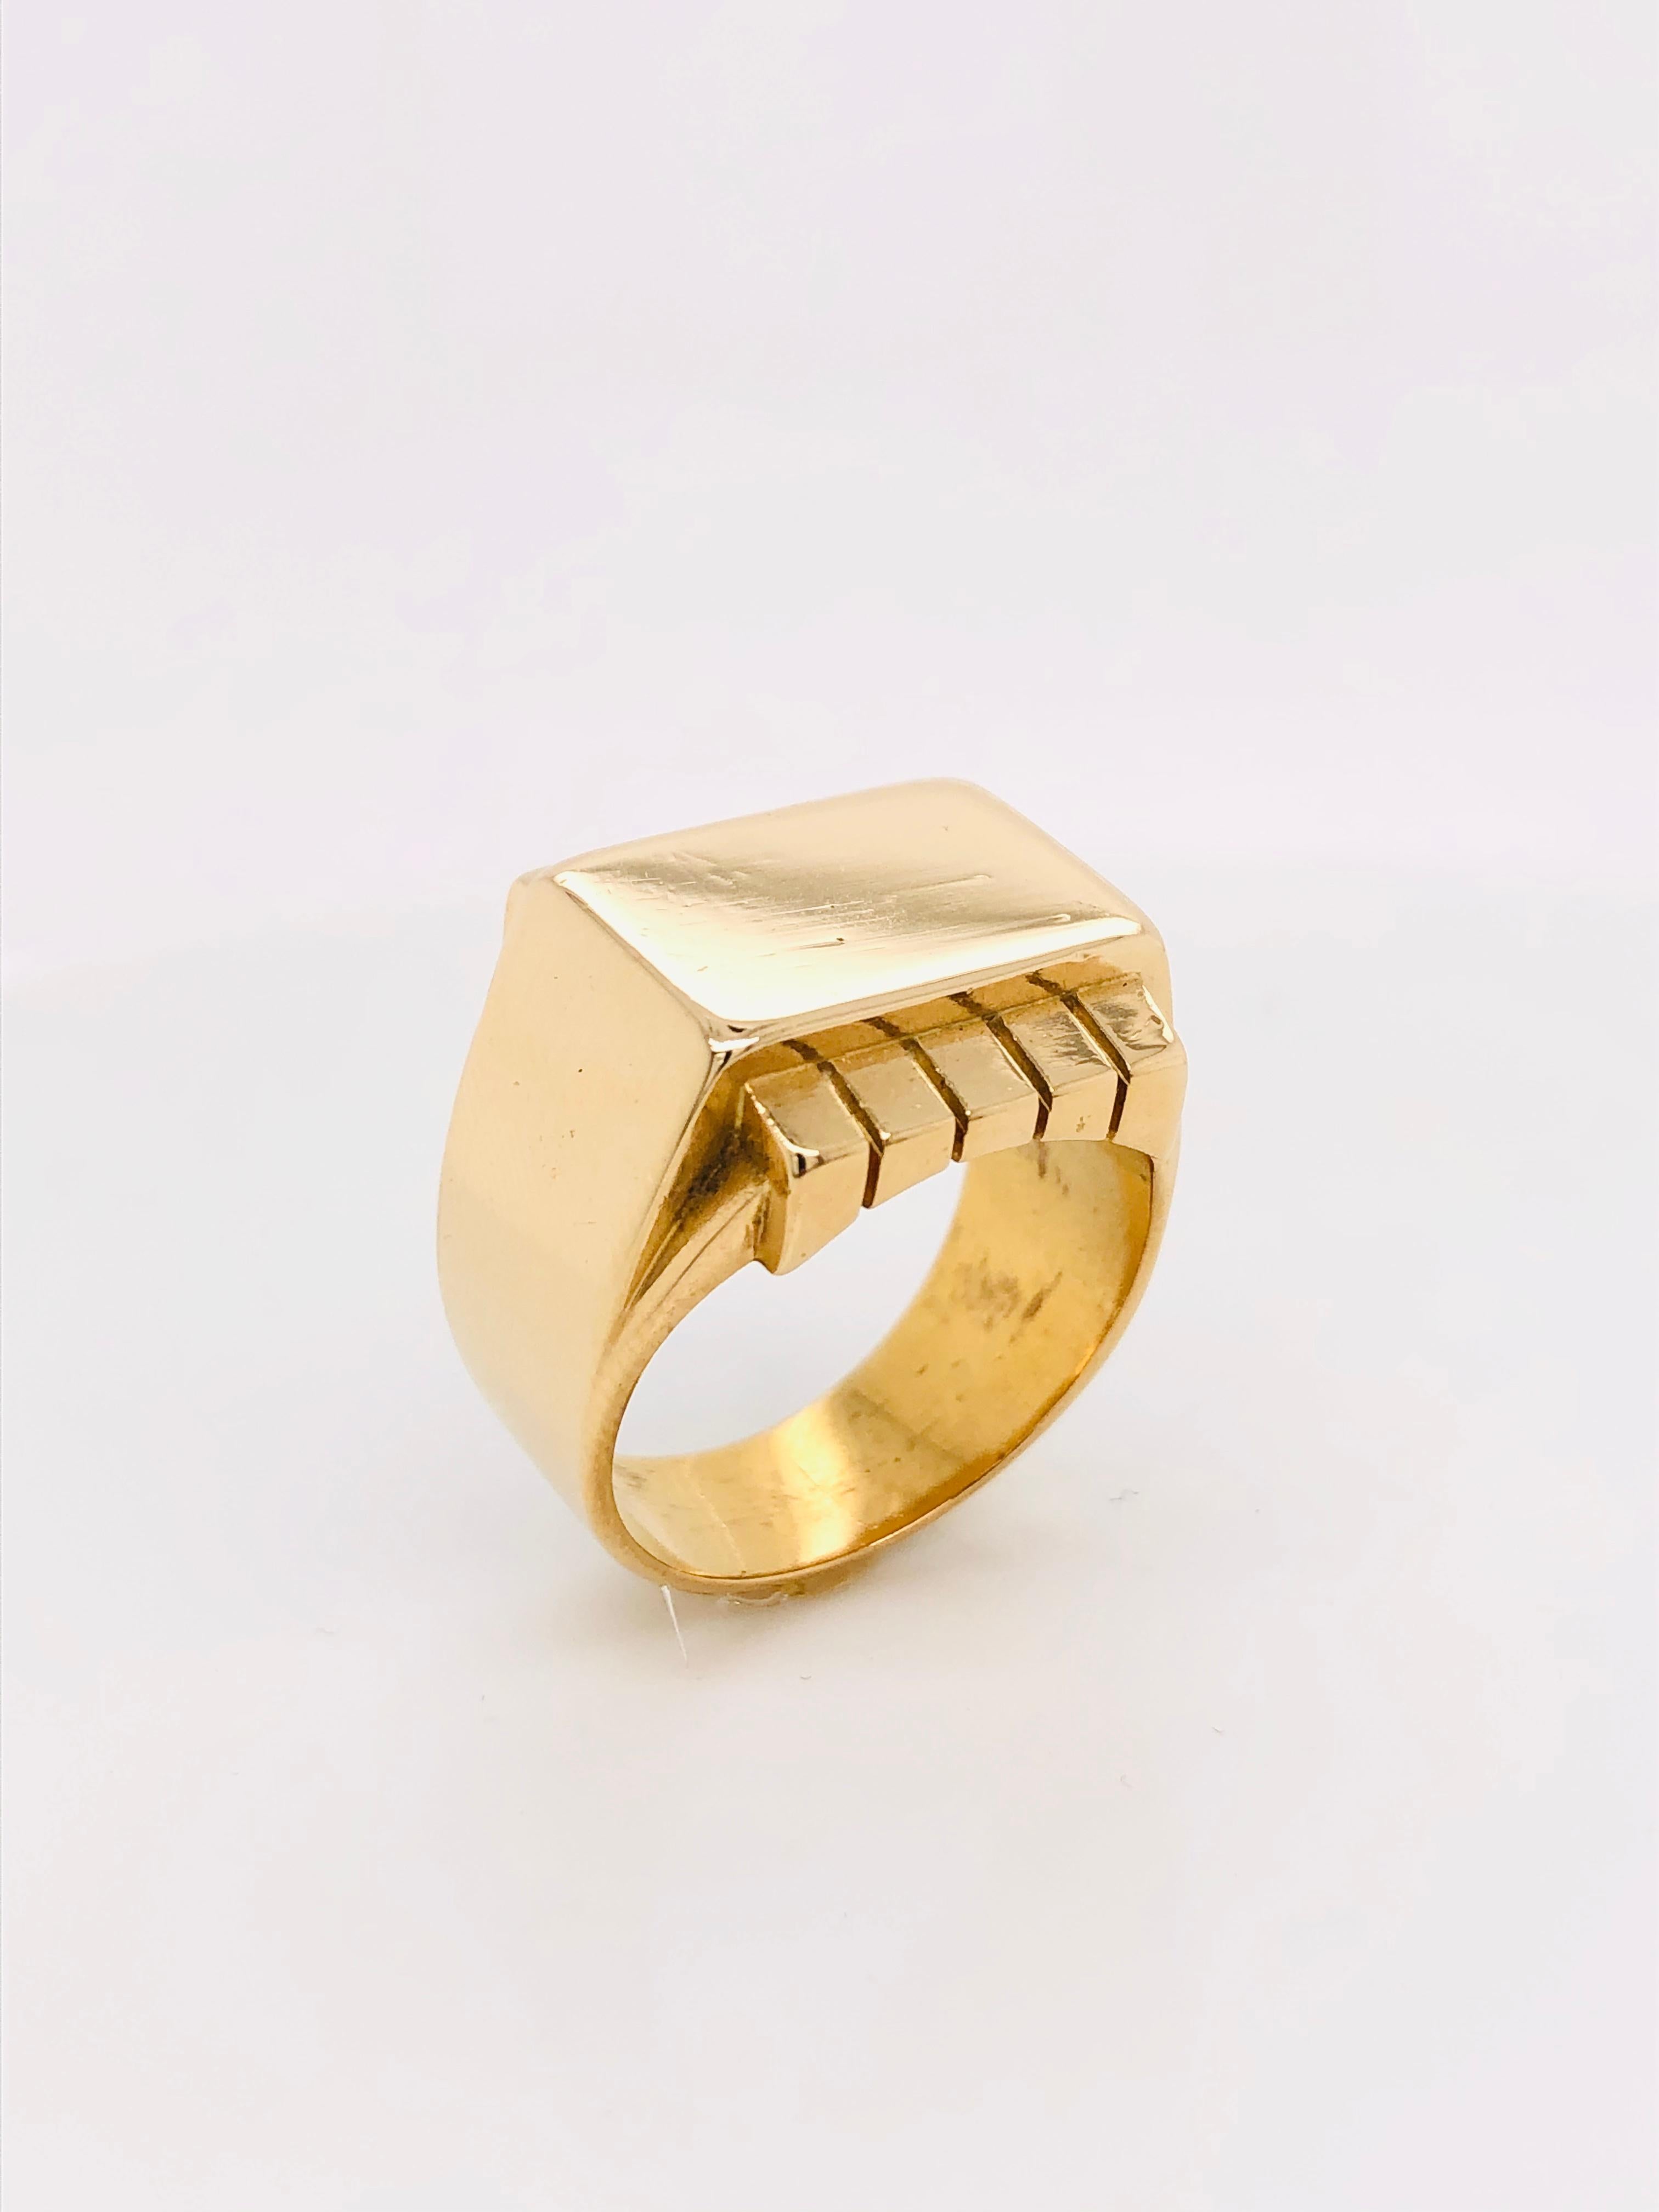 Signet ring in 18-carat yellow gold, a timeless jewel that embodies the very essence of luxury and elegance. Meticulously designed and crafted from the finest 18-carat yellow gold, this signet ring is a work of art that combines tradition and